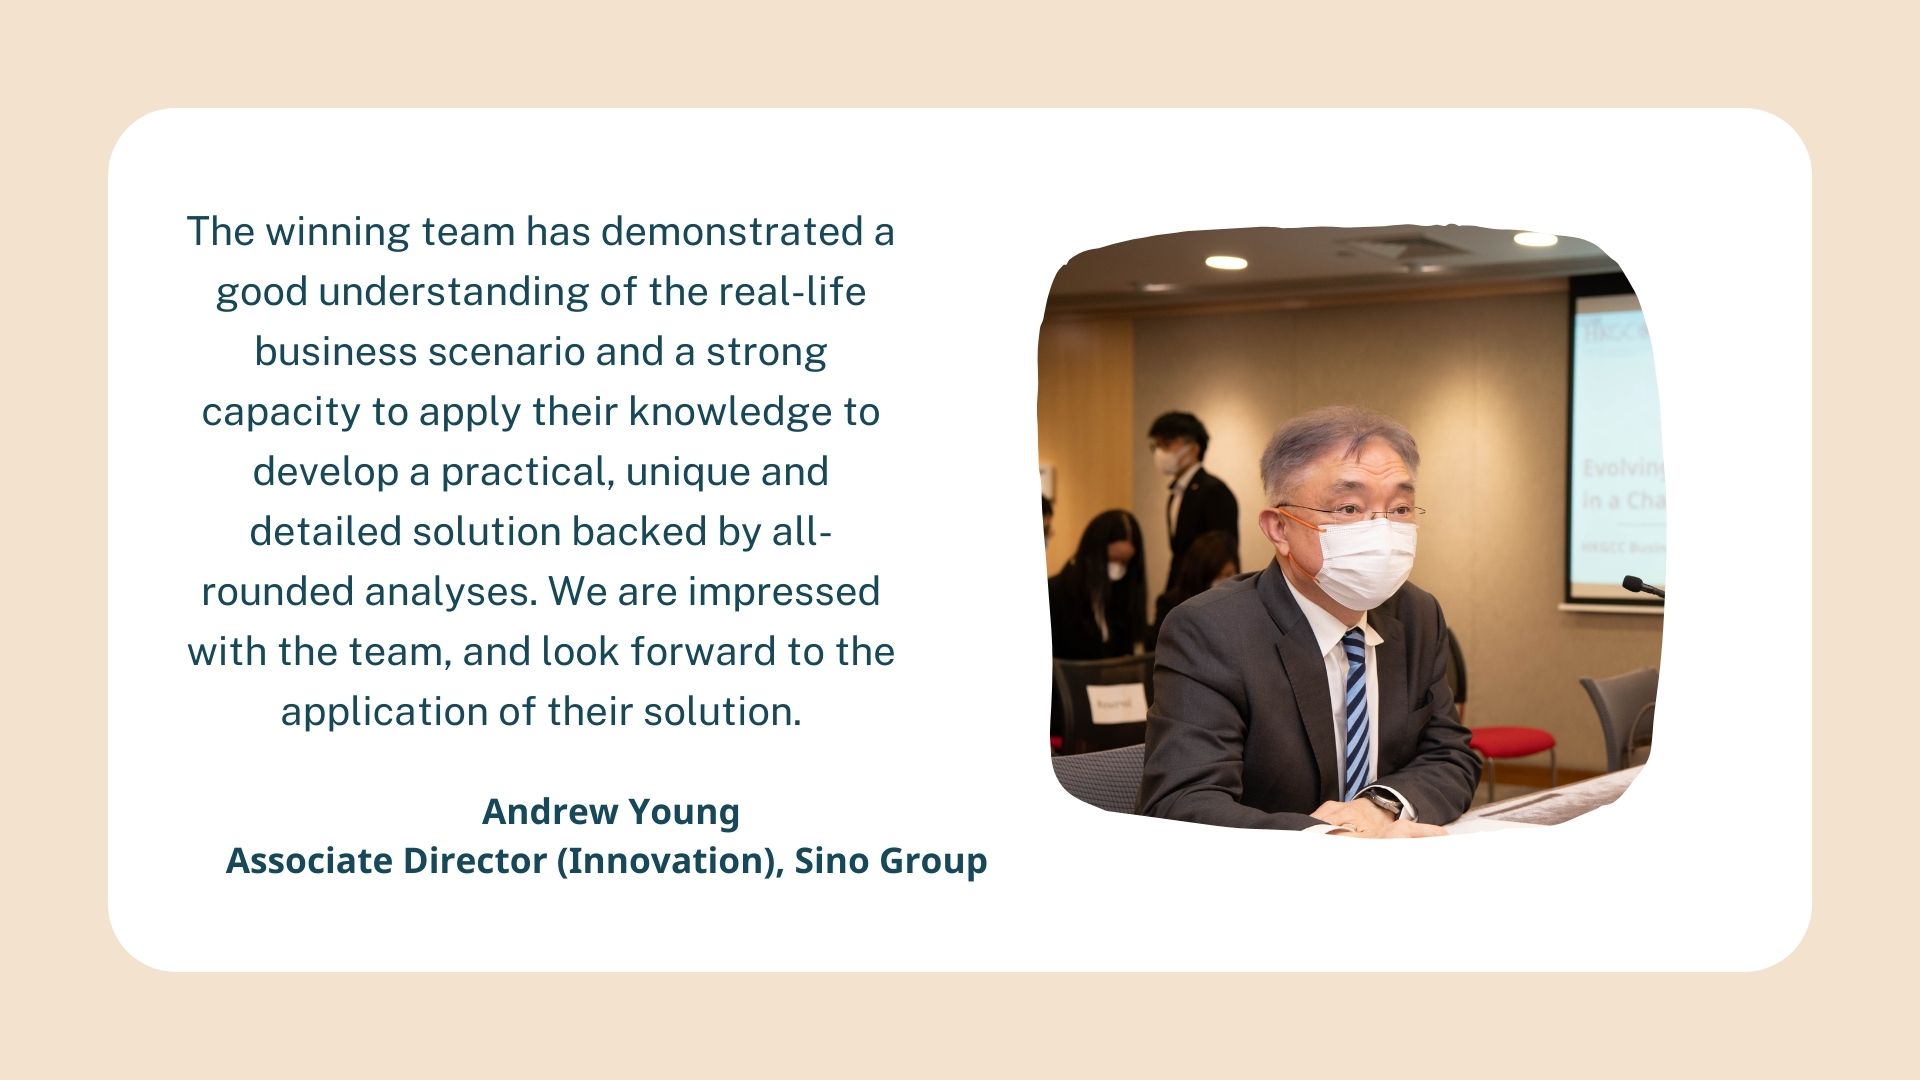 Andrew Young, Associate Director (Innovation), Sino Group